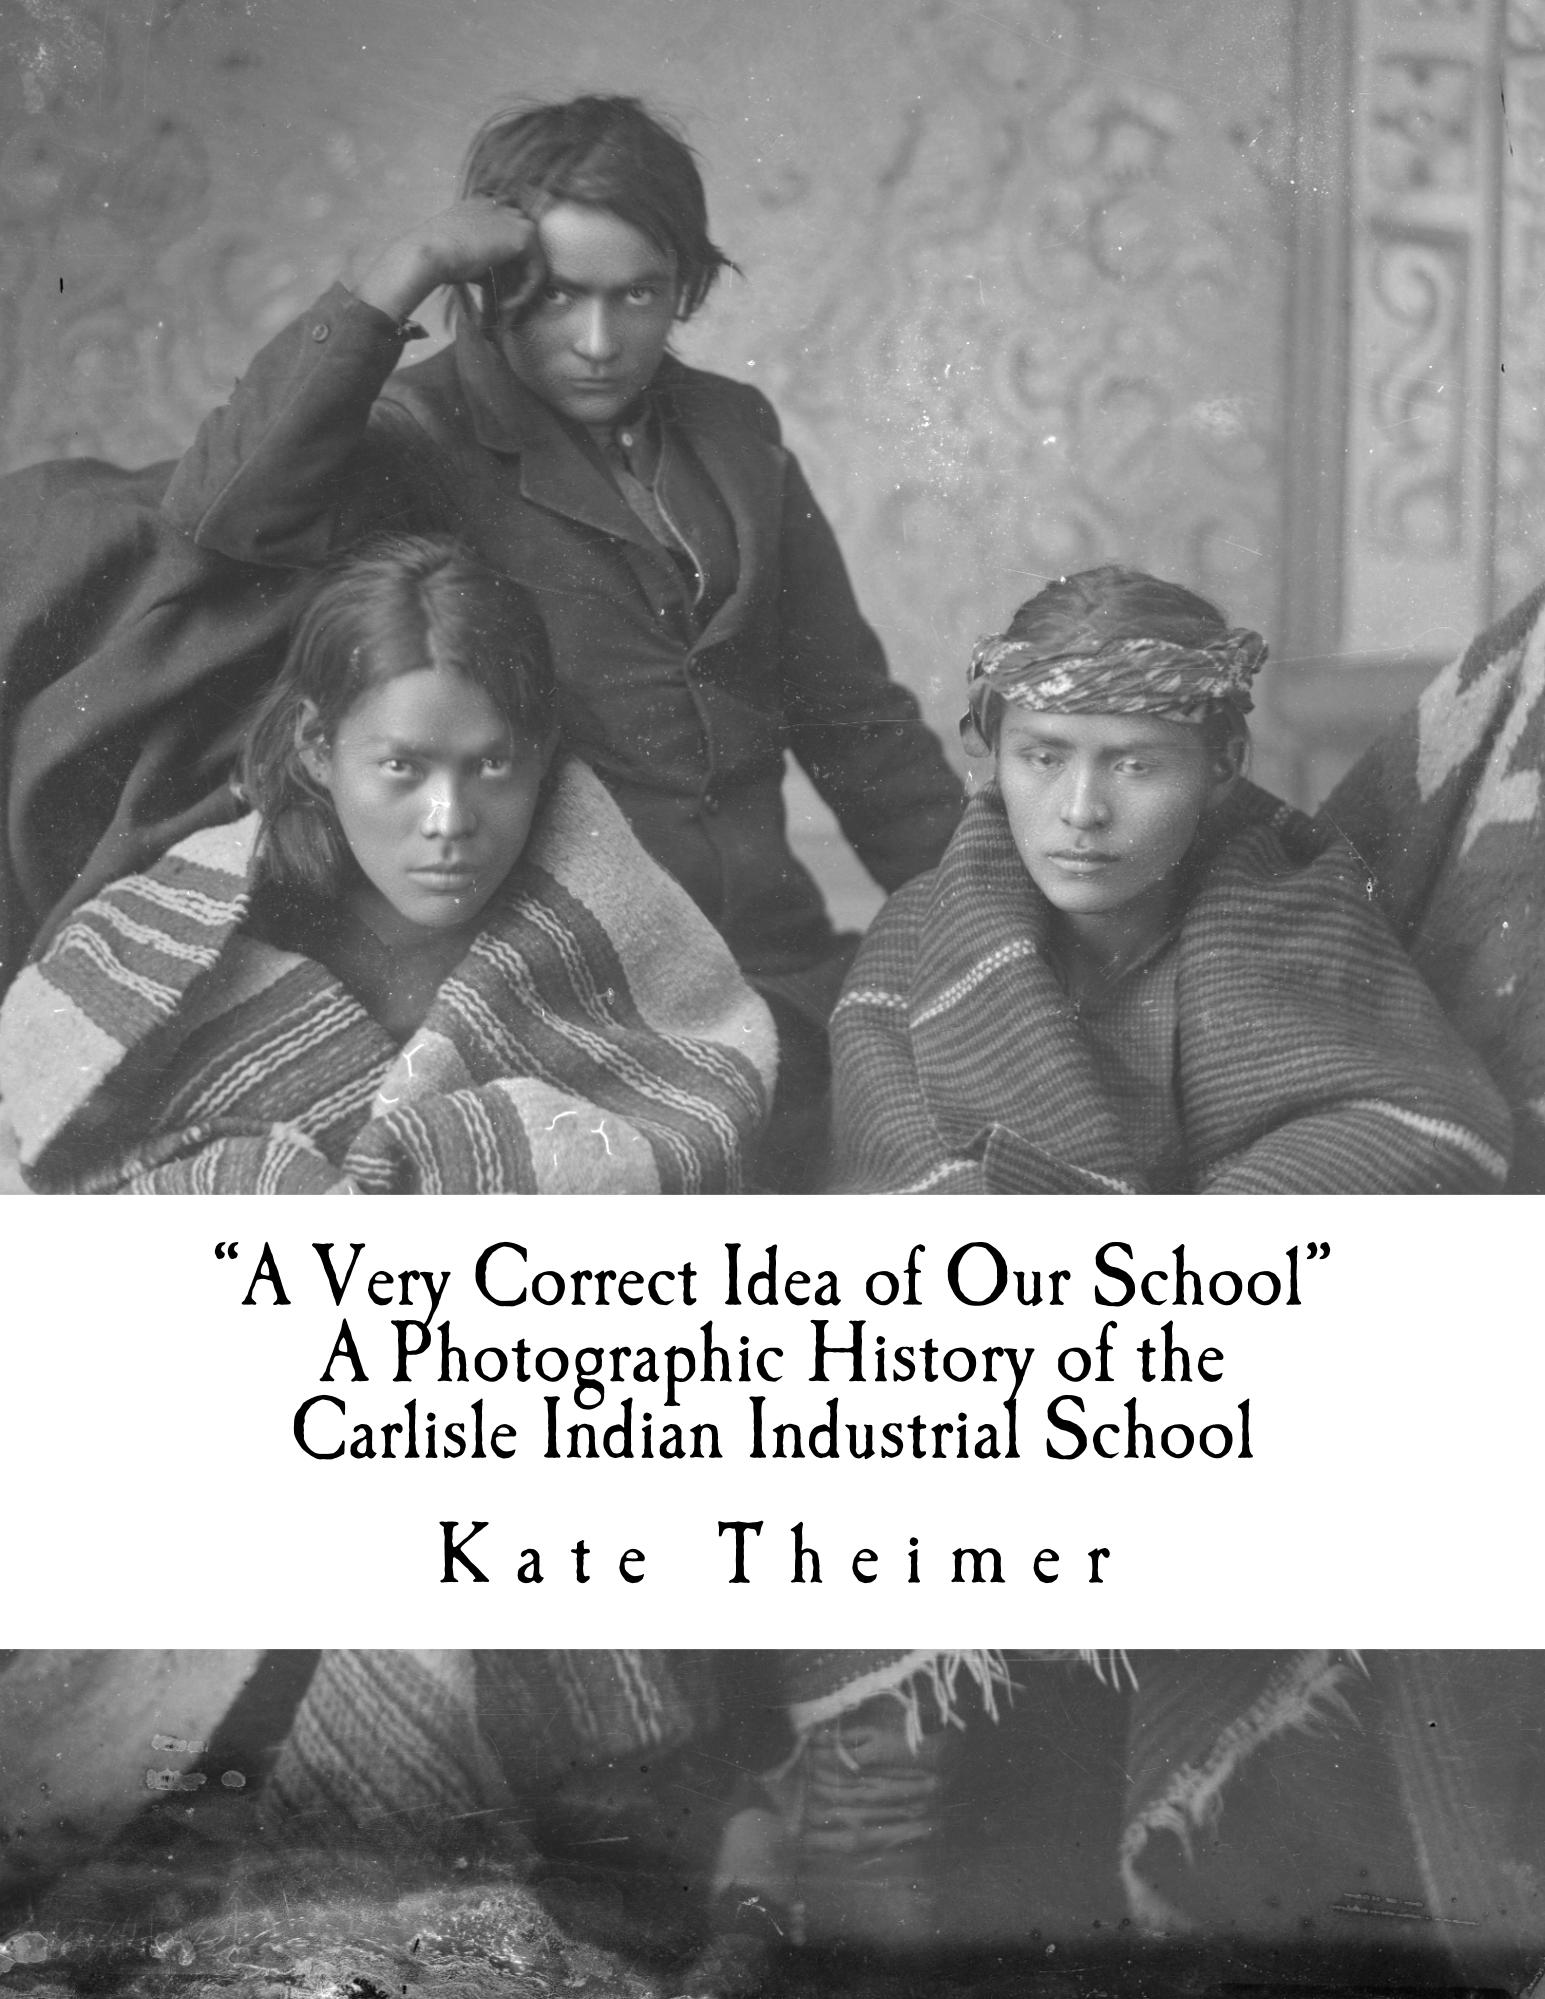 A Very Correct Idea of Our School: A Photographic History of the Carlisle Indian Industrial School